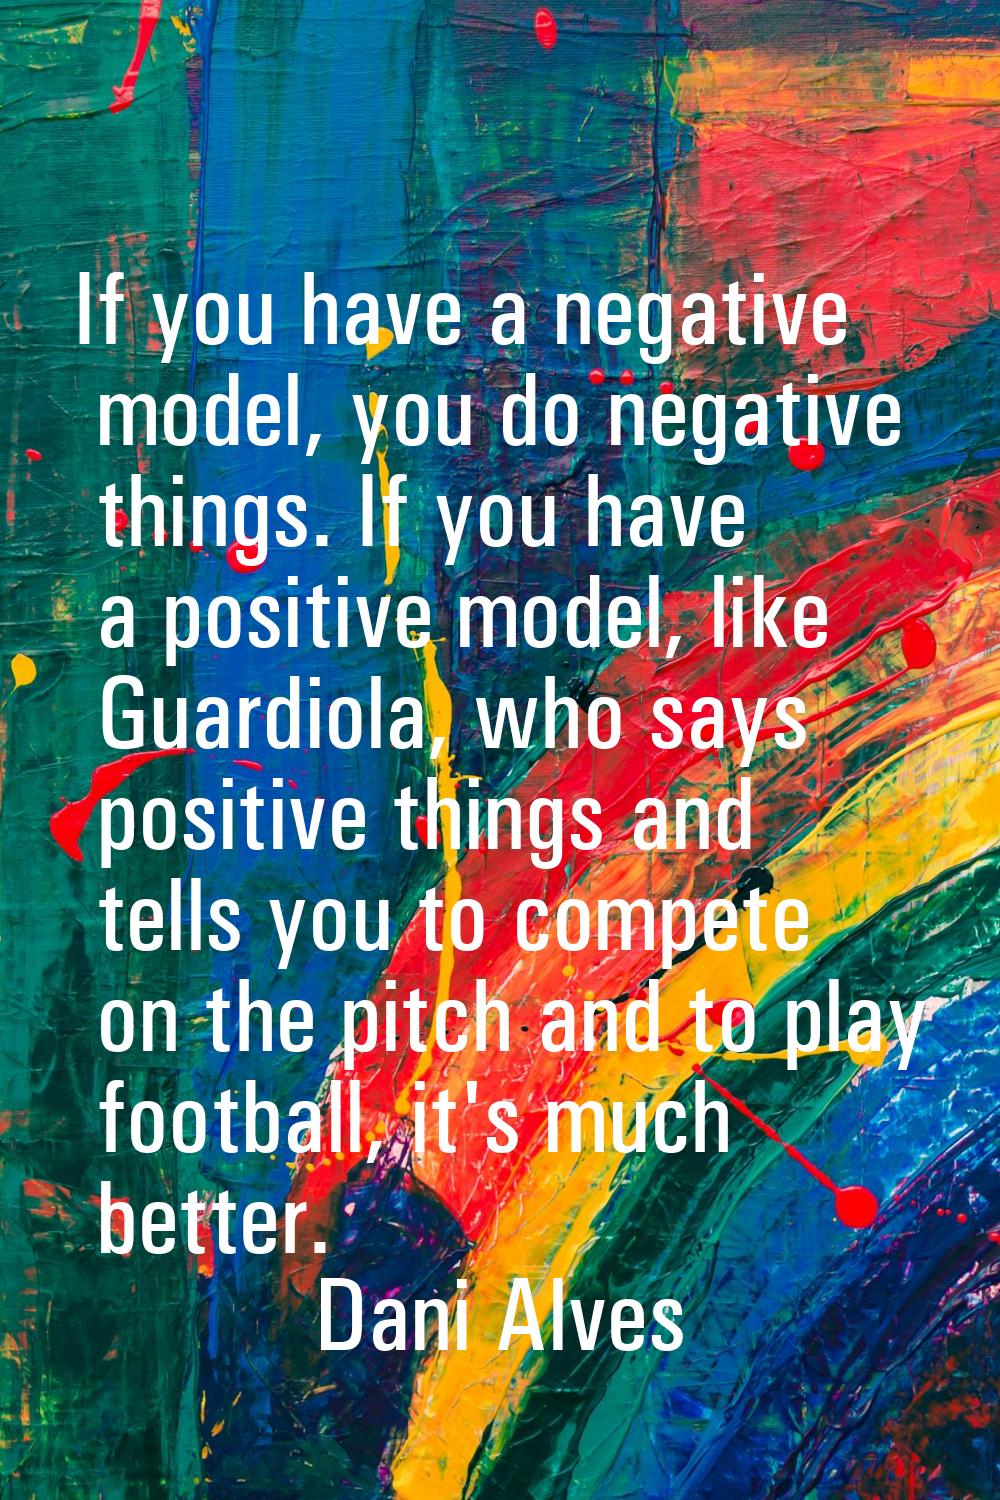 If you have a negative model, you do negative things. If you have a positive model, like Guardiola,